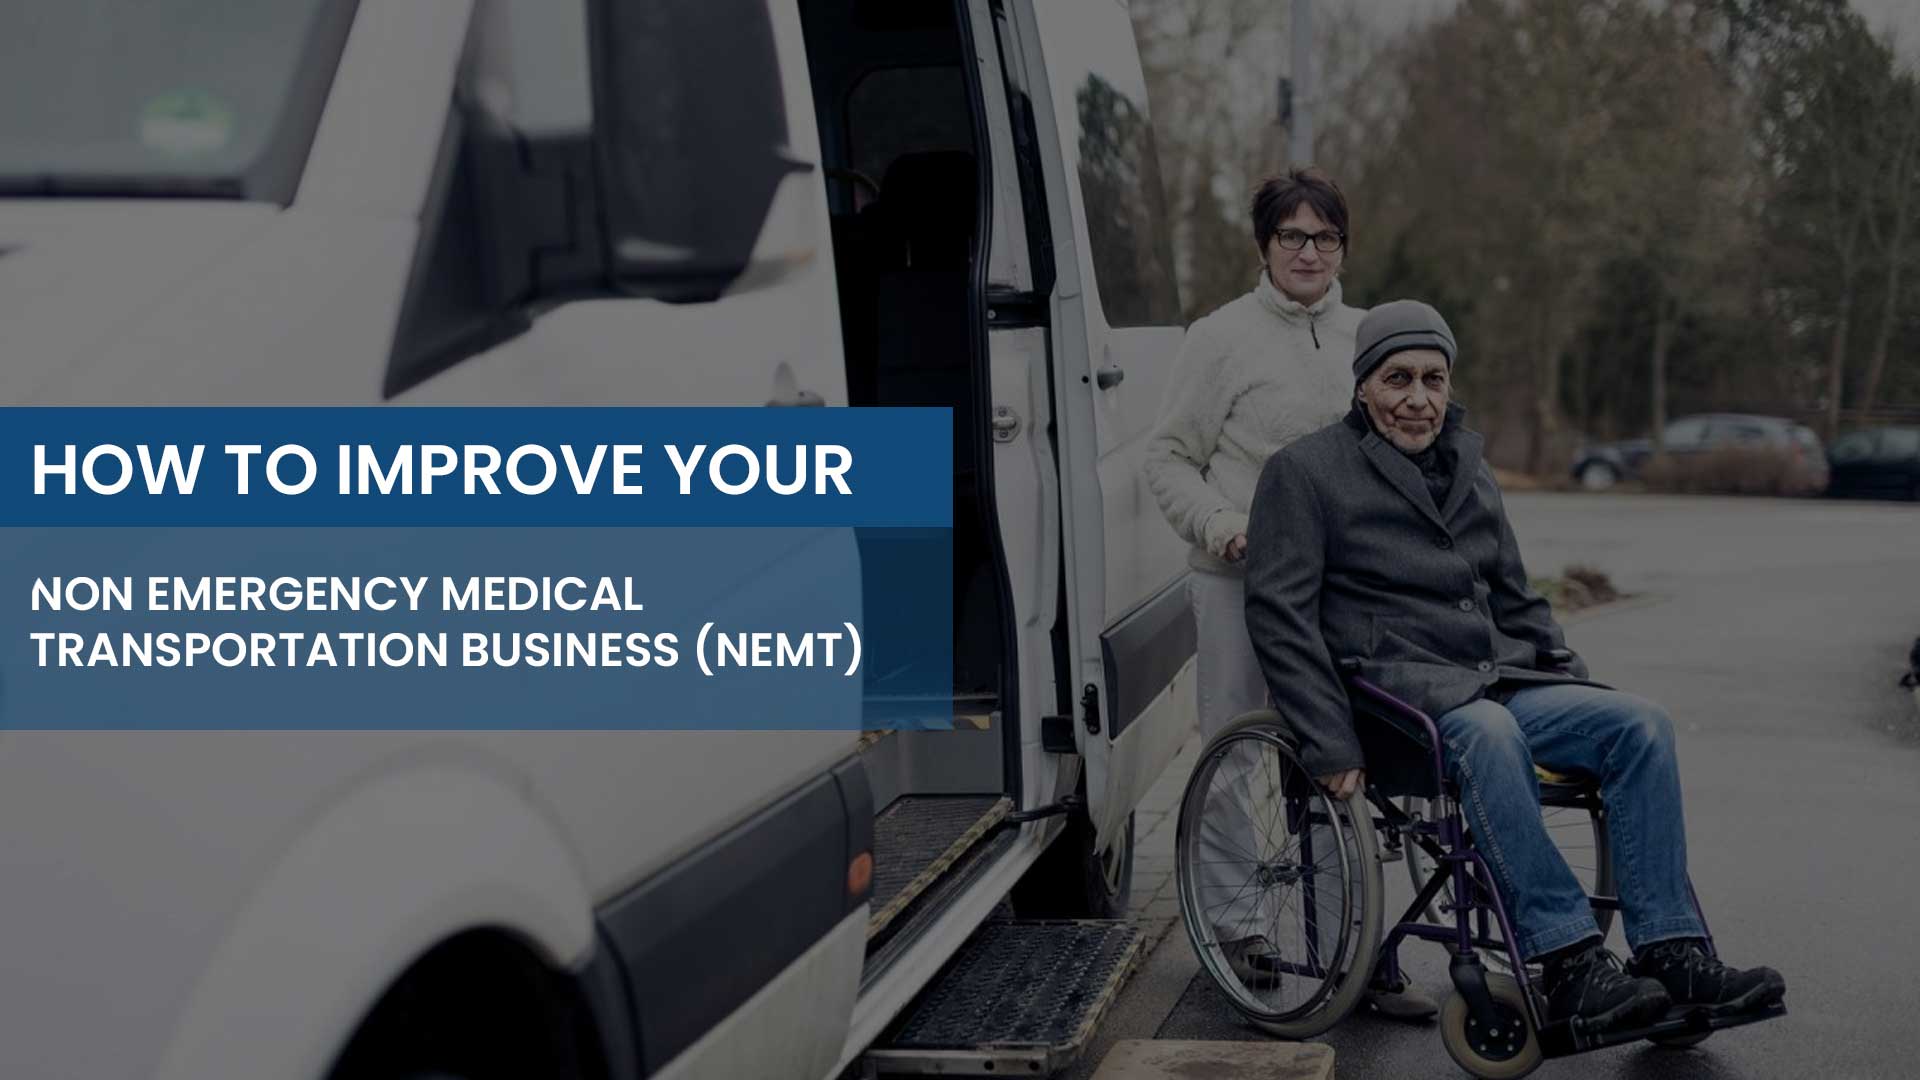 How to improve your Non Emergency Medical Transportation Business (NEMT)